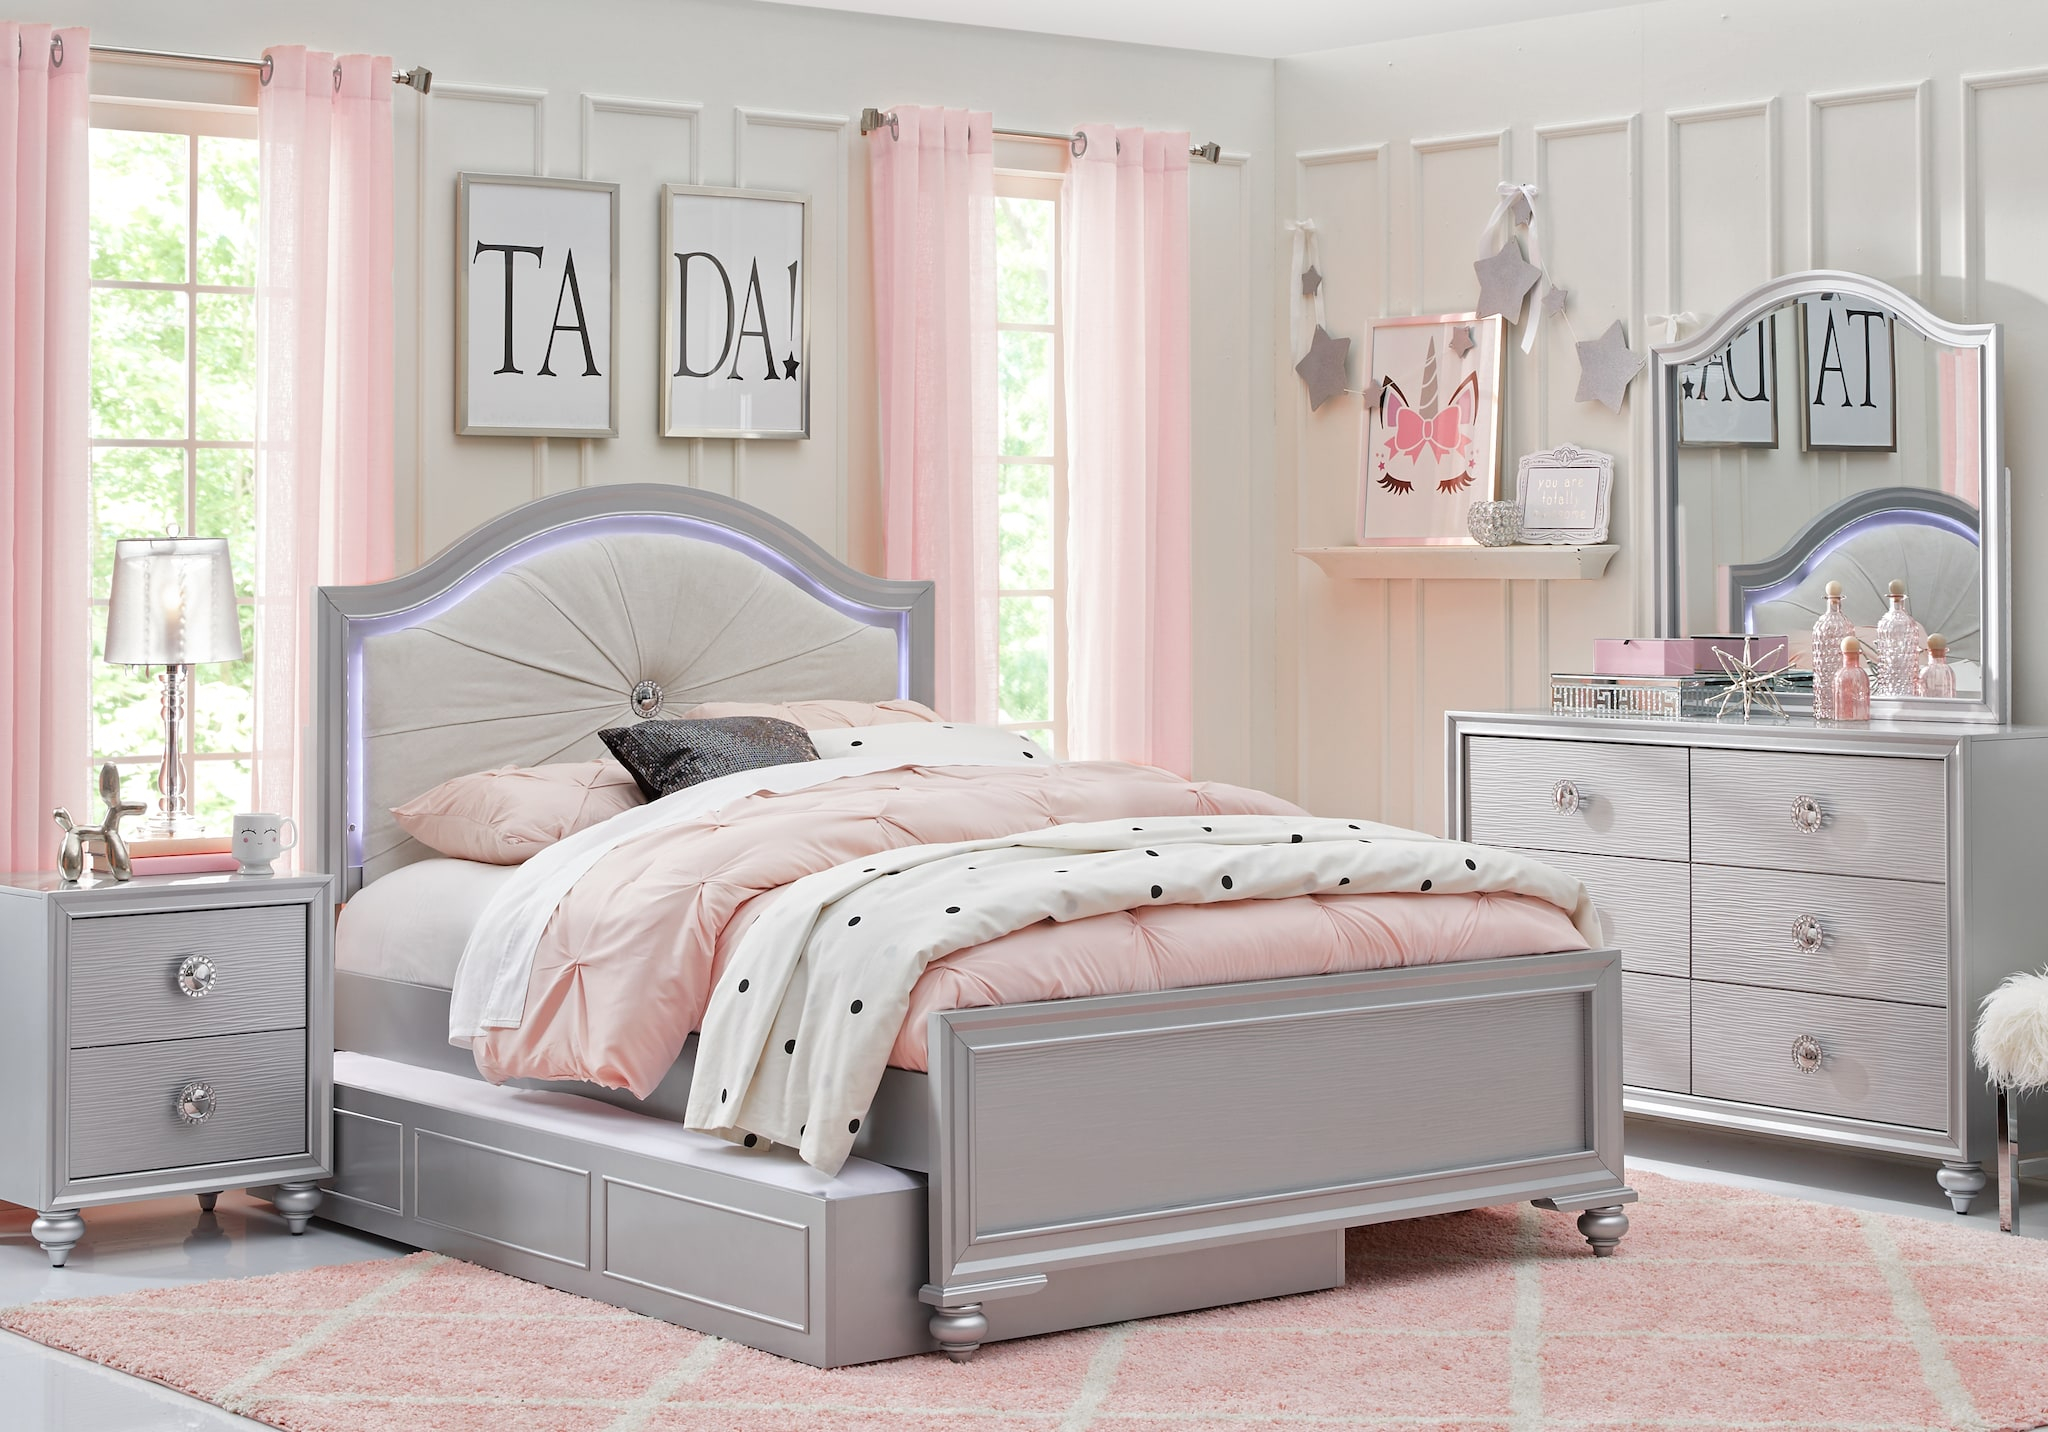 Girls Bedroom Sets Suitable Combine With Teen Bedroom Sets For Girls throughout dimensions 2048 X 1432